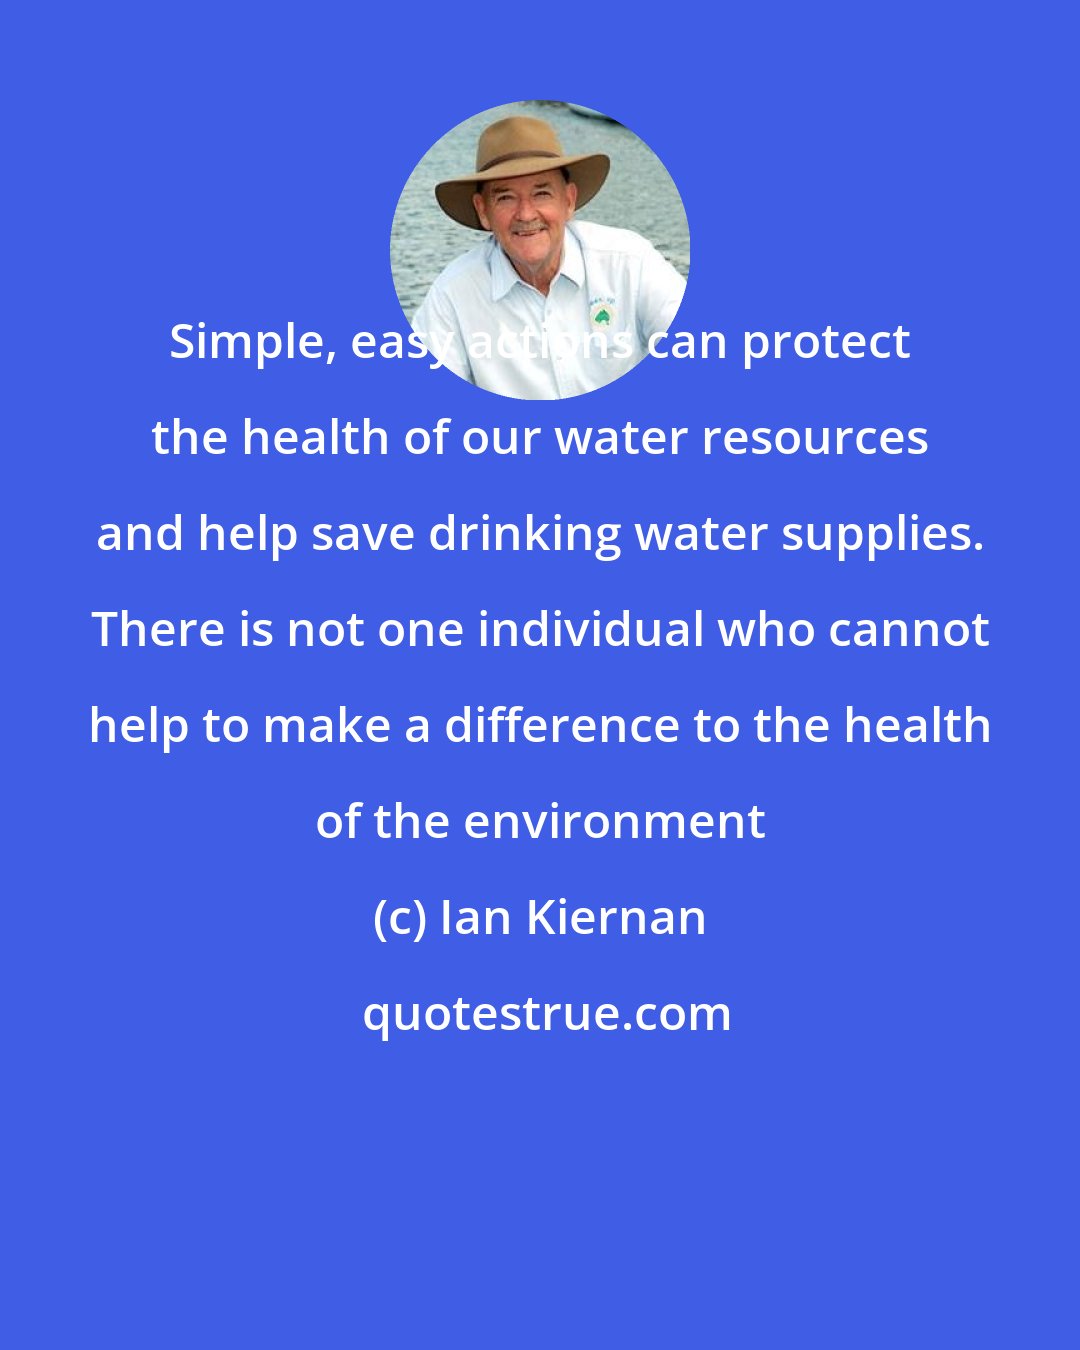 Ian Kiernan: Simple, easy actions can protect the health of our water resources and help save drinking water supplies. There is not one individual who cannot help to make a difference to the health of the environment